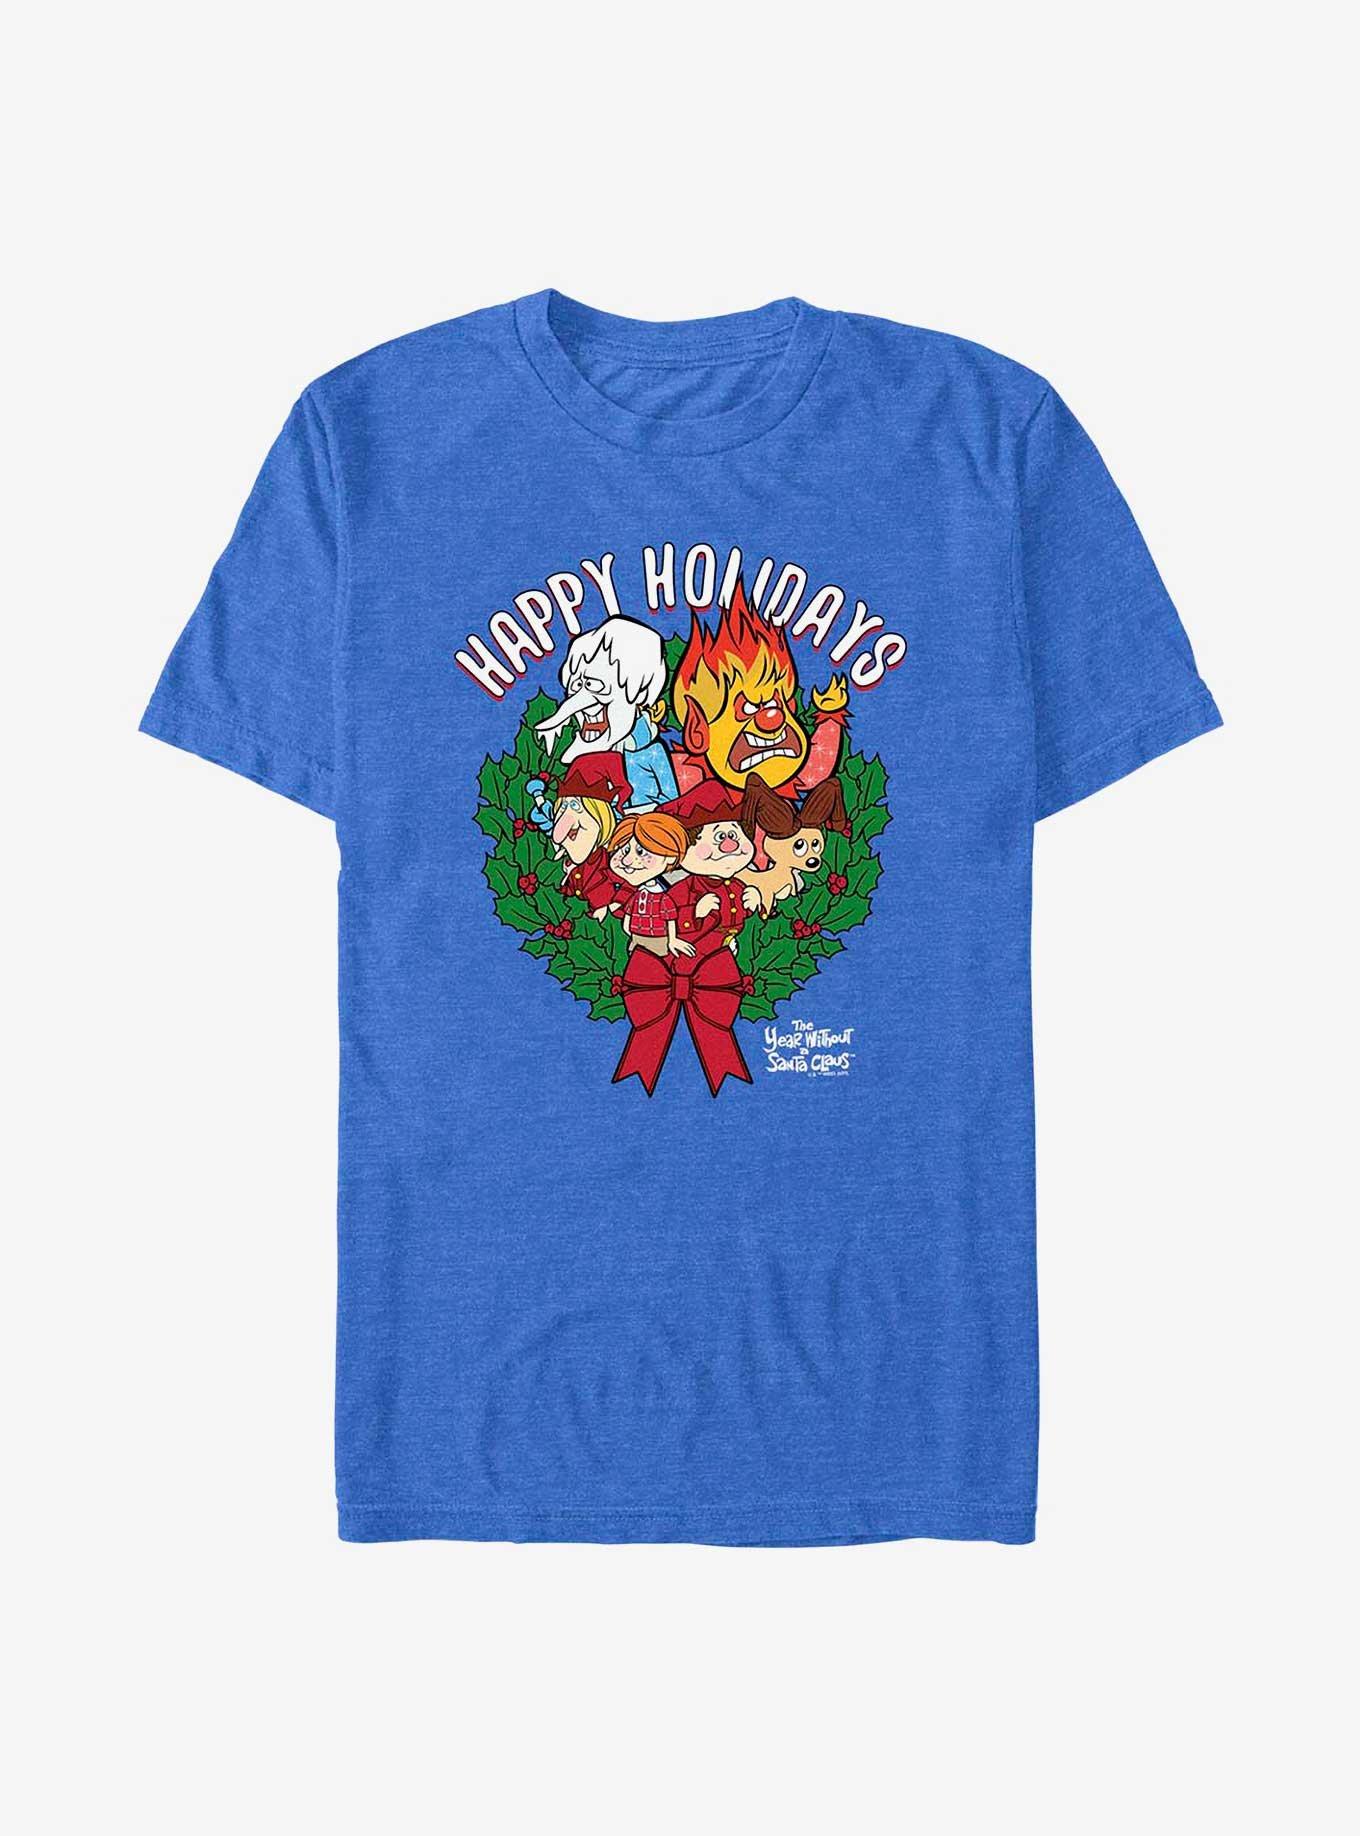 The Year Without A Santa Claus Happy Holidays Wreath T-Shirt - BLUE ...